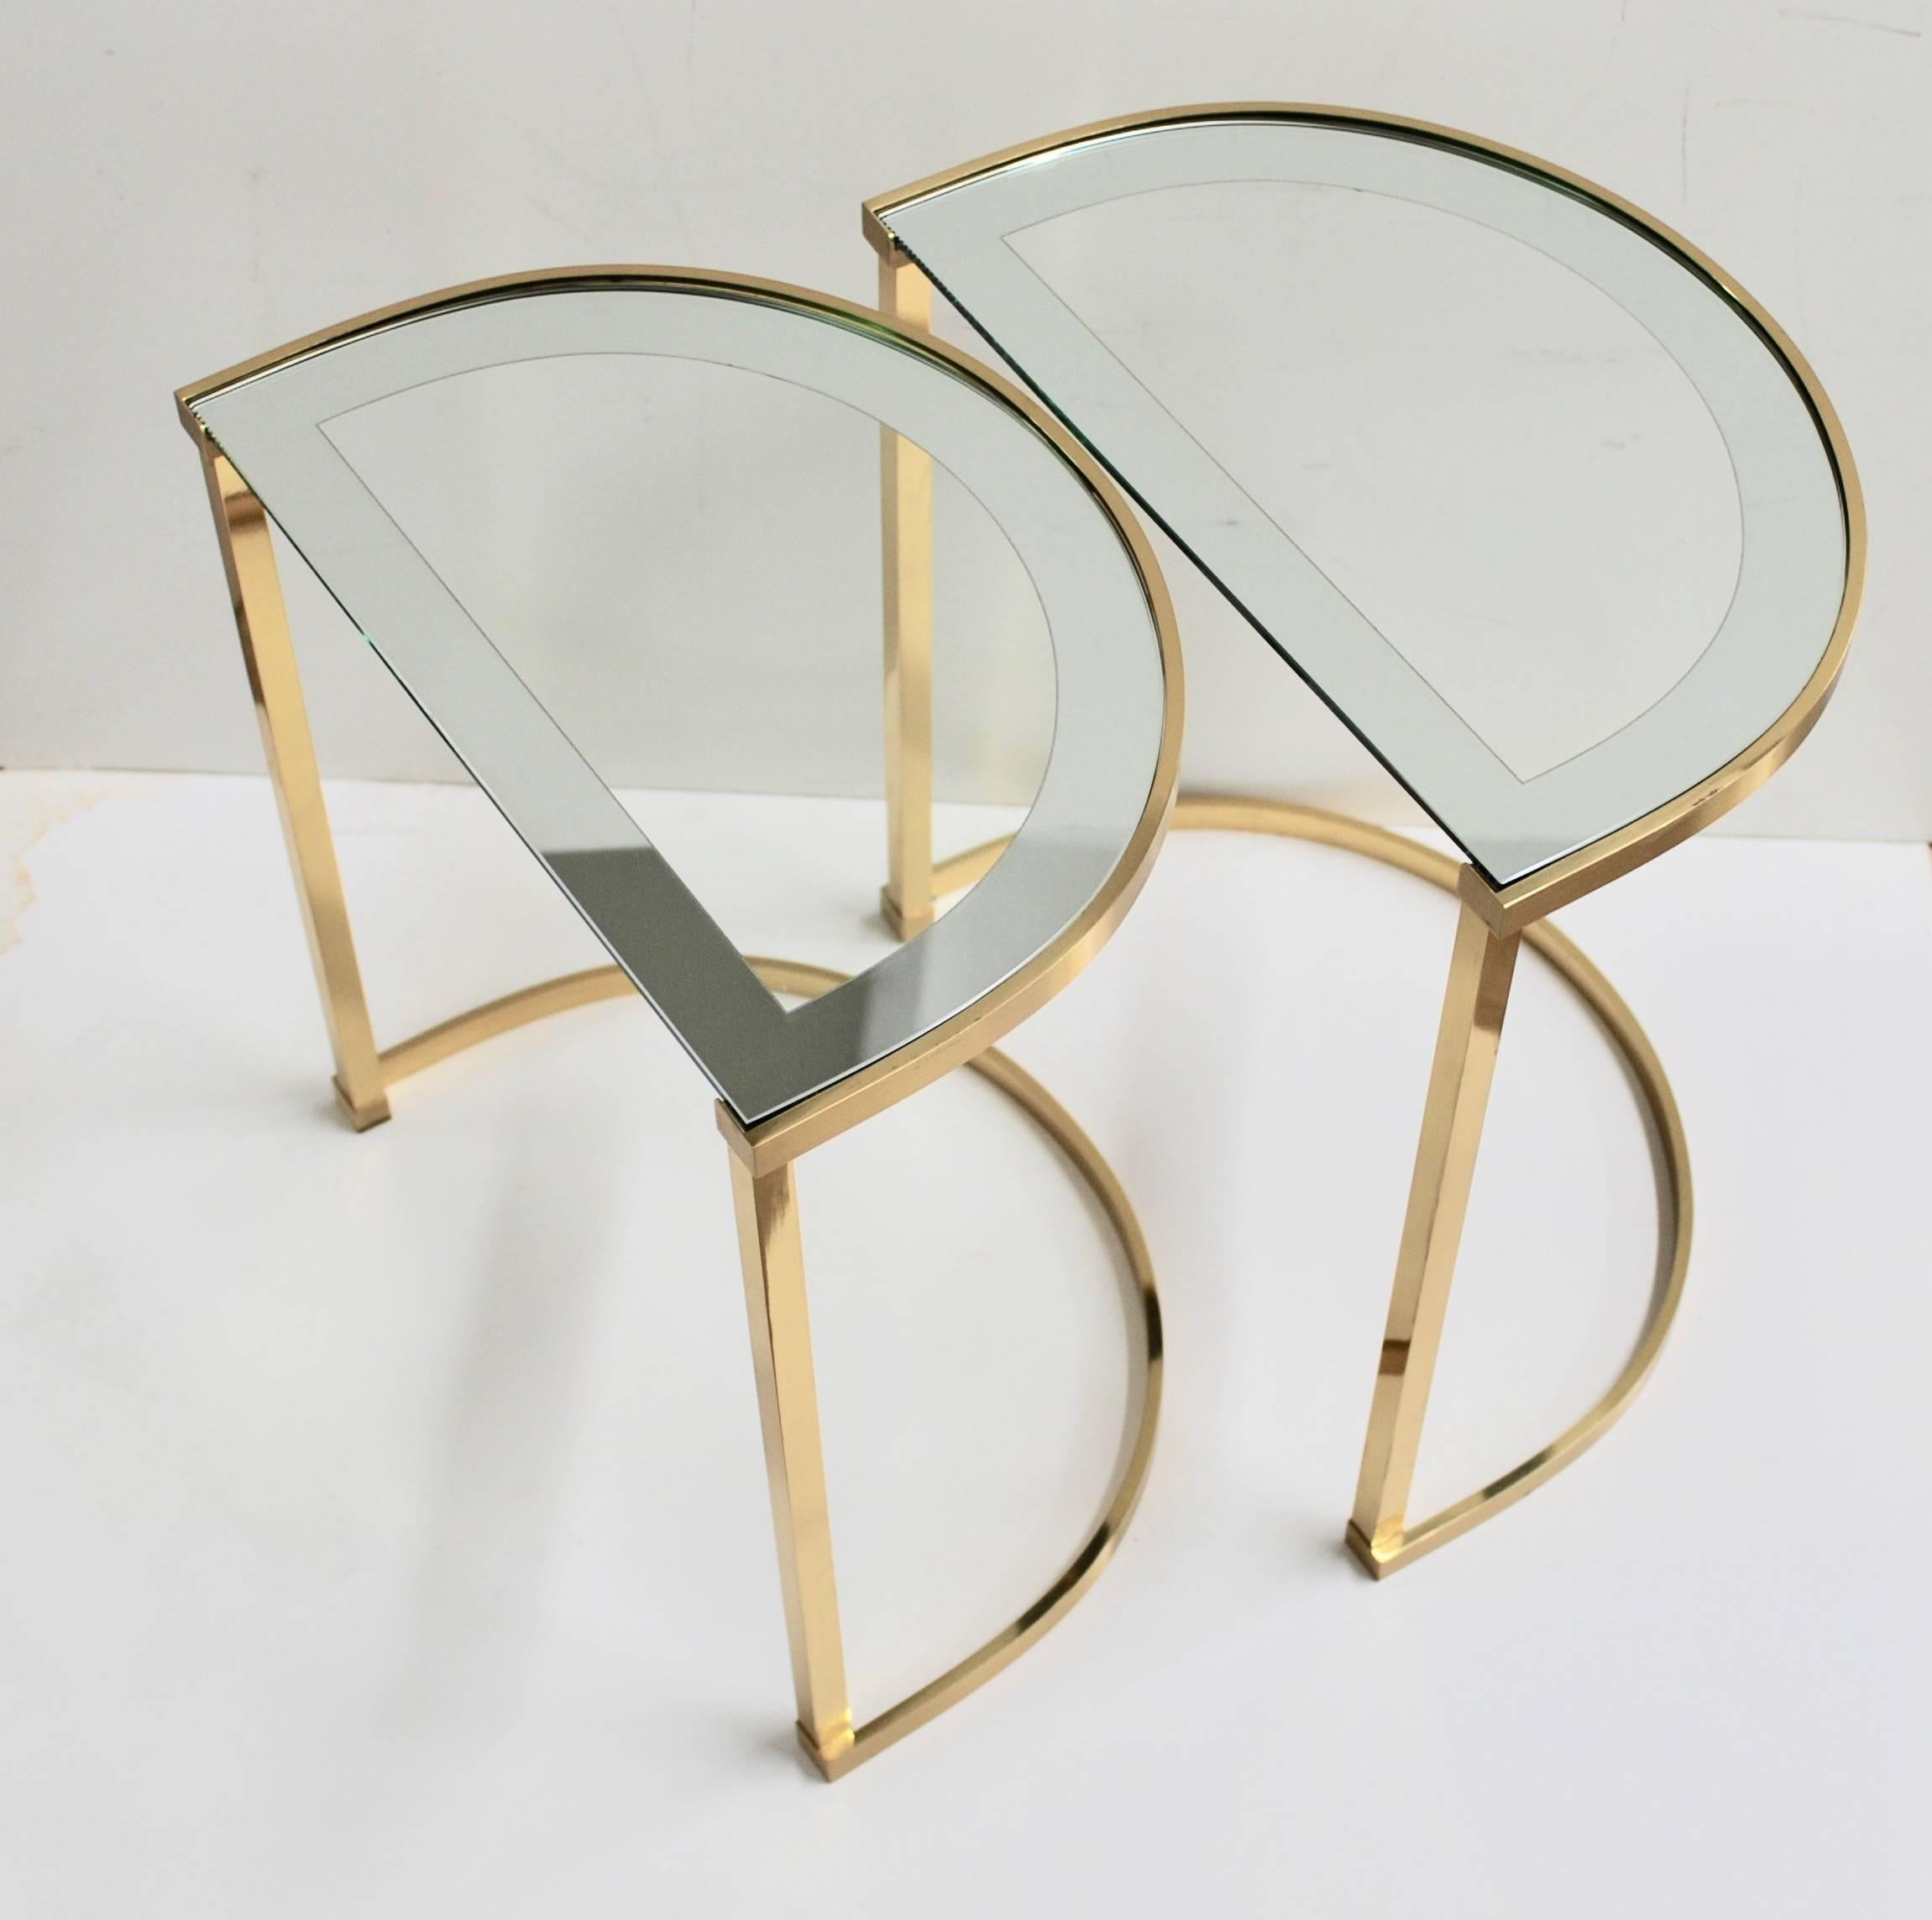 A pair of Italian demilune side tables, circa 1970s with the original glass tops which have a mirror border.